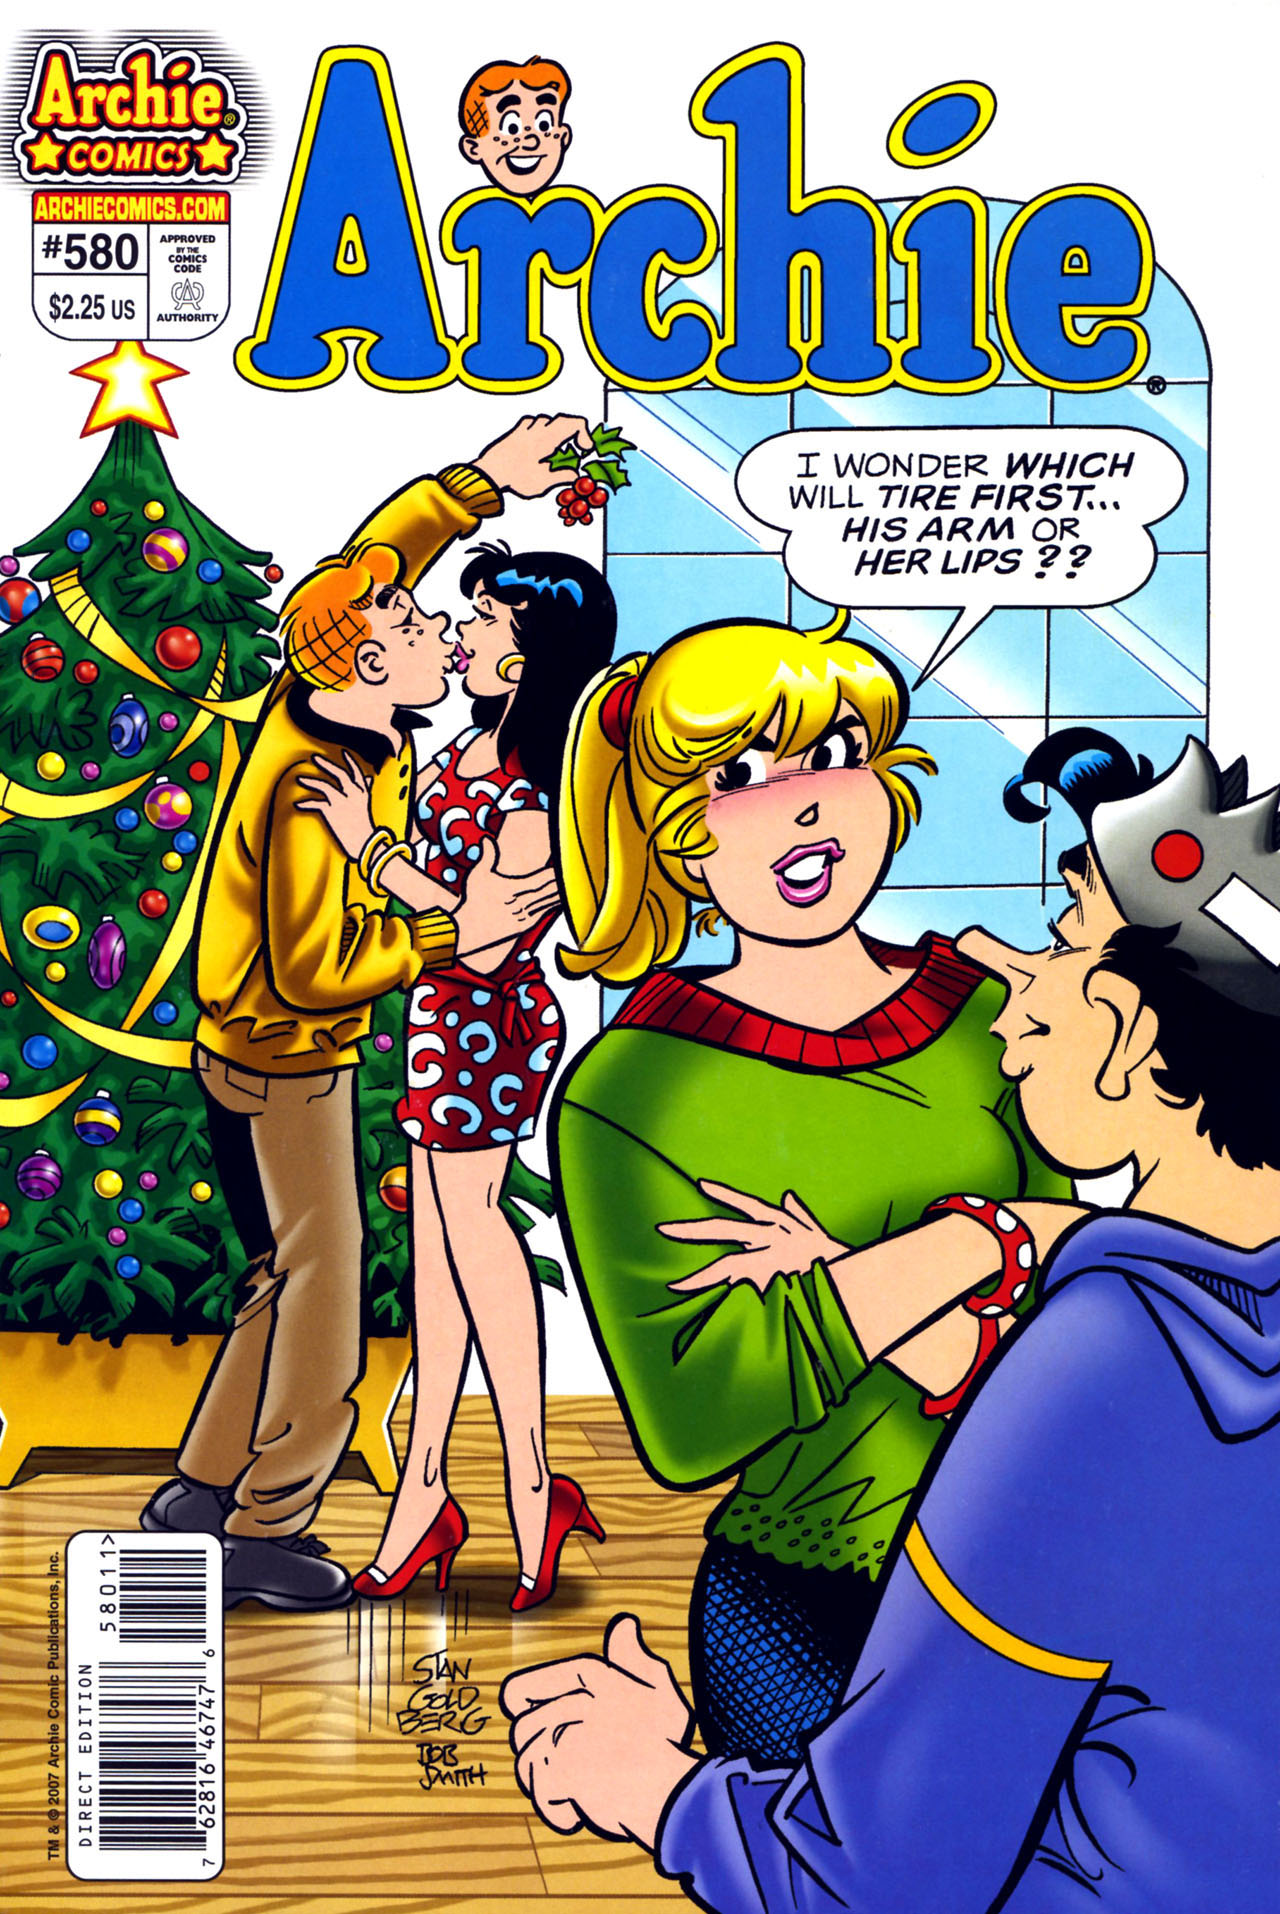 Archie (1960) 580 Page 1